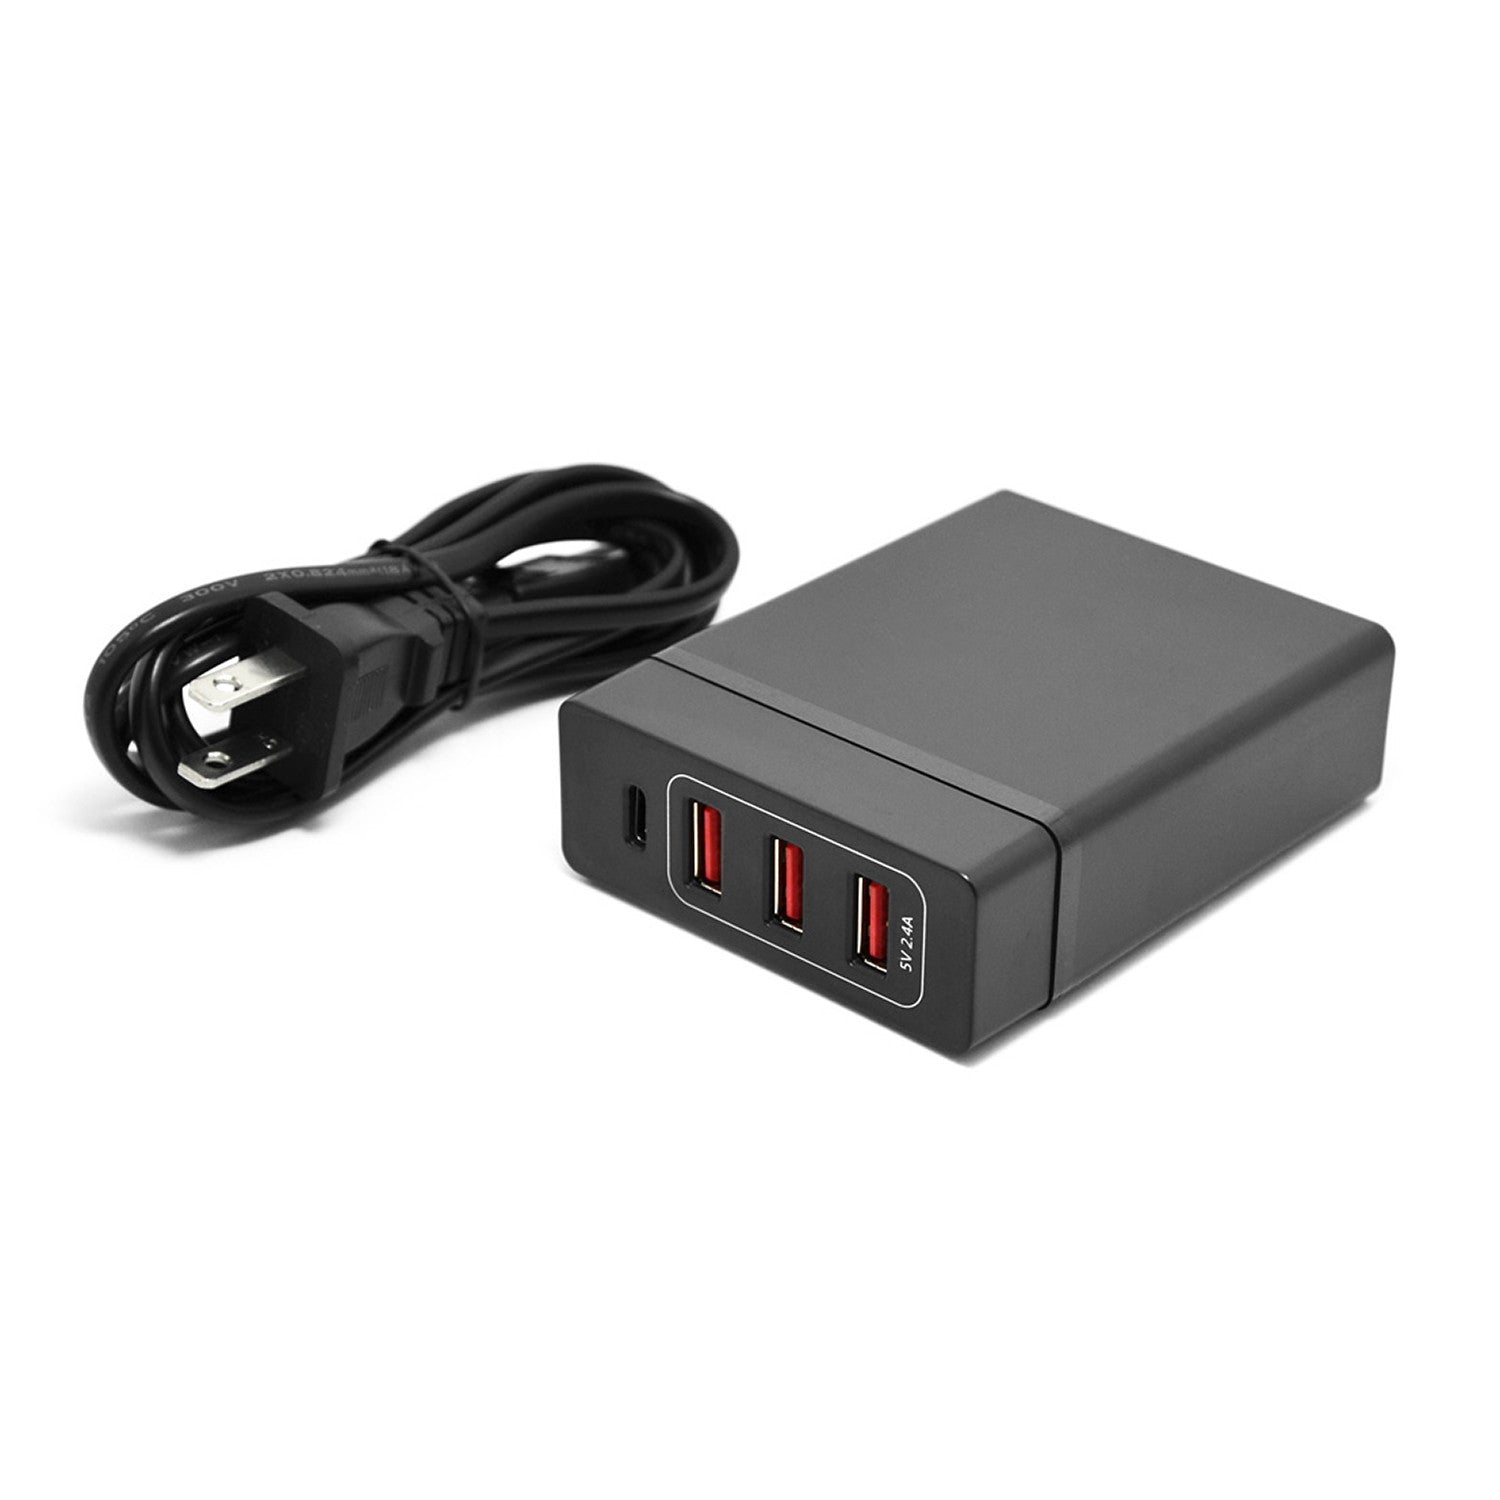 Black usb and usb-c charging station with power cord